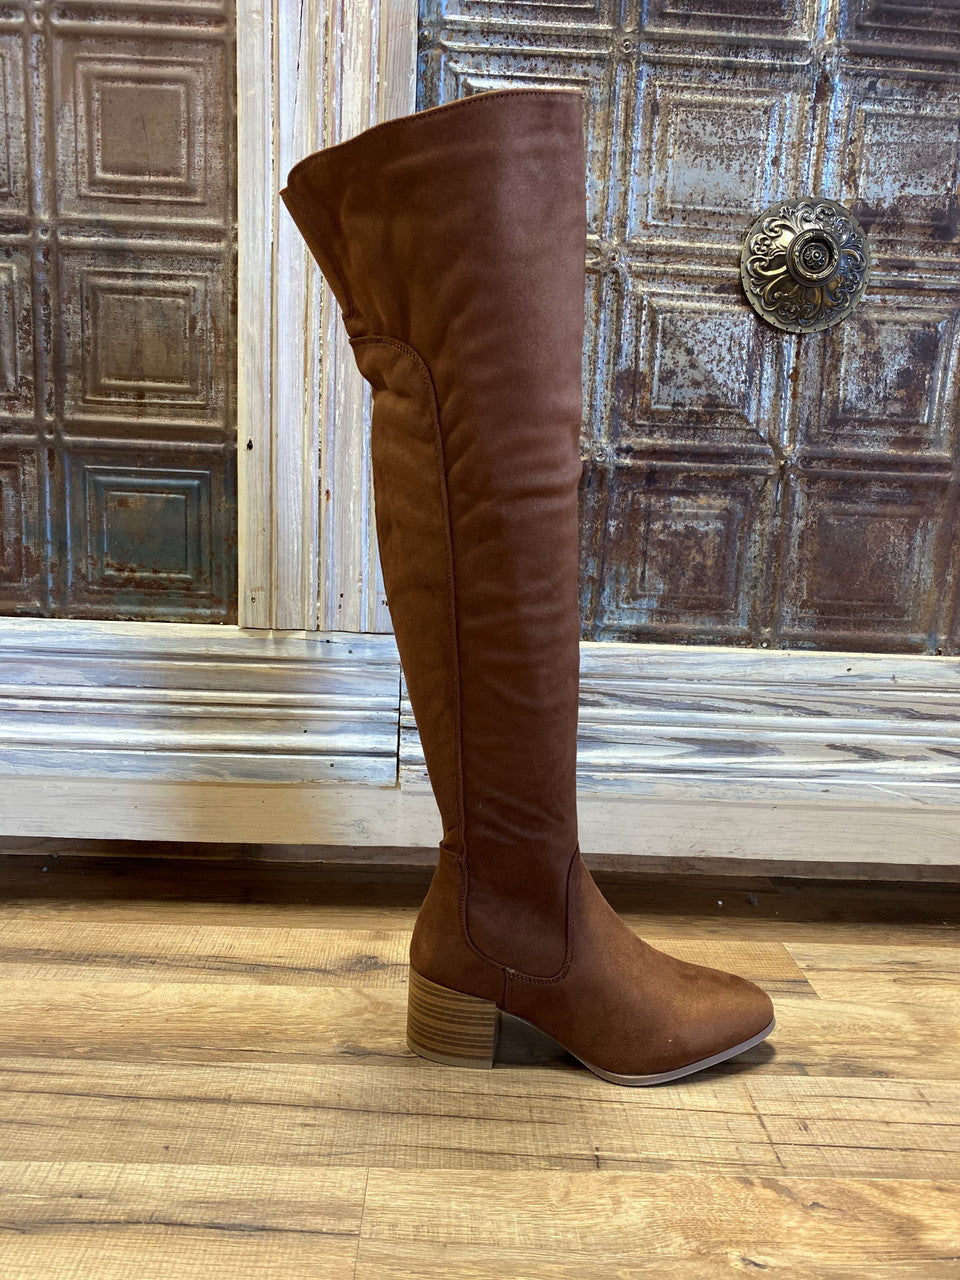 Sepia Knee High Boots